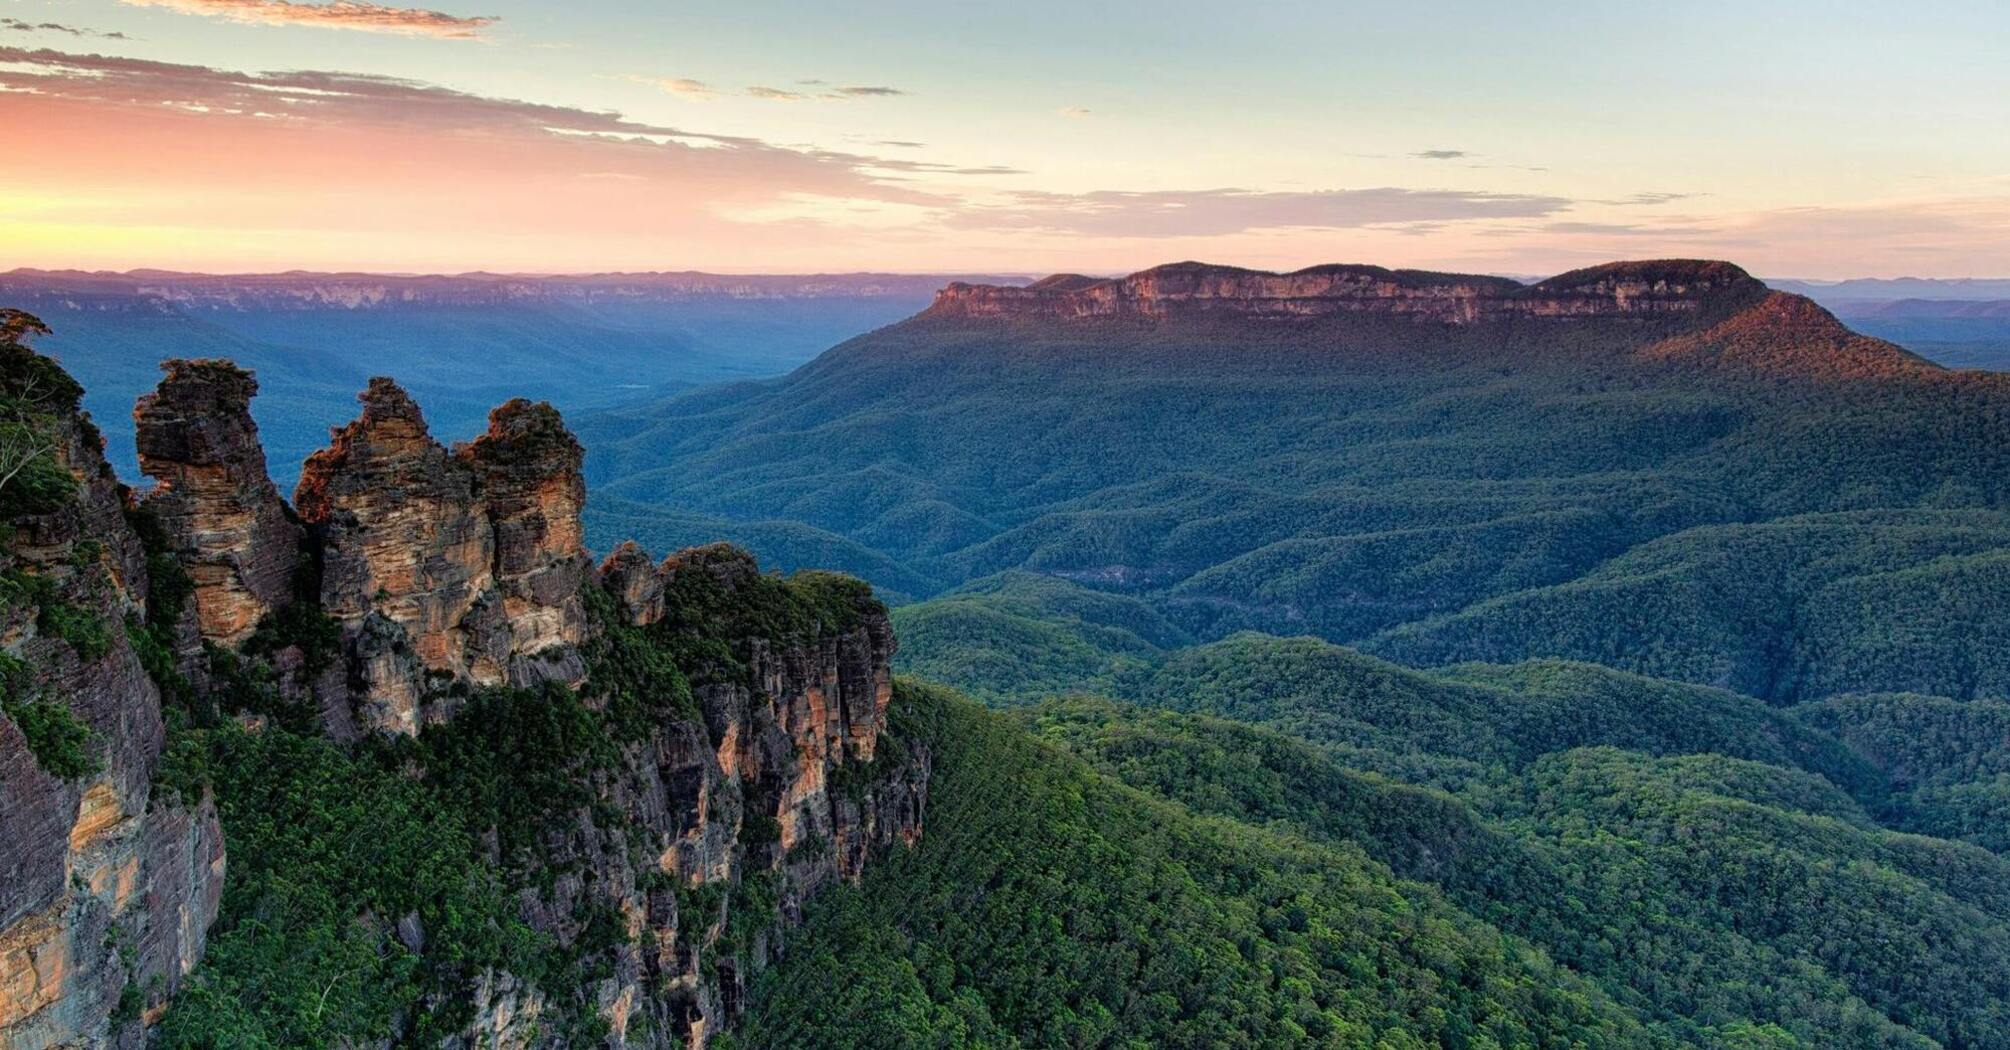 Blue Mountains National Park: What you should know before visiting